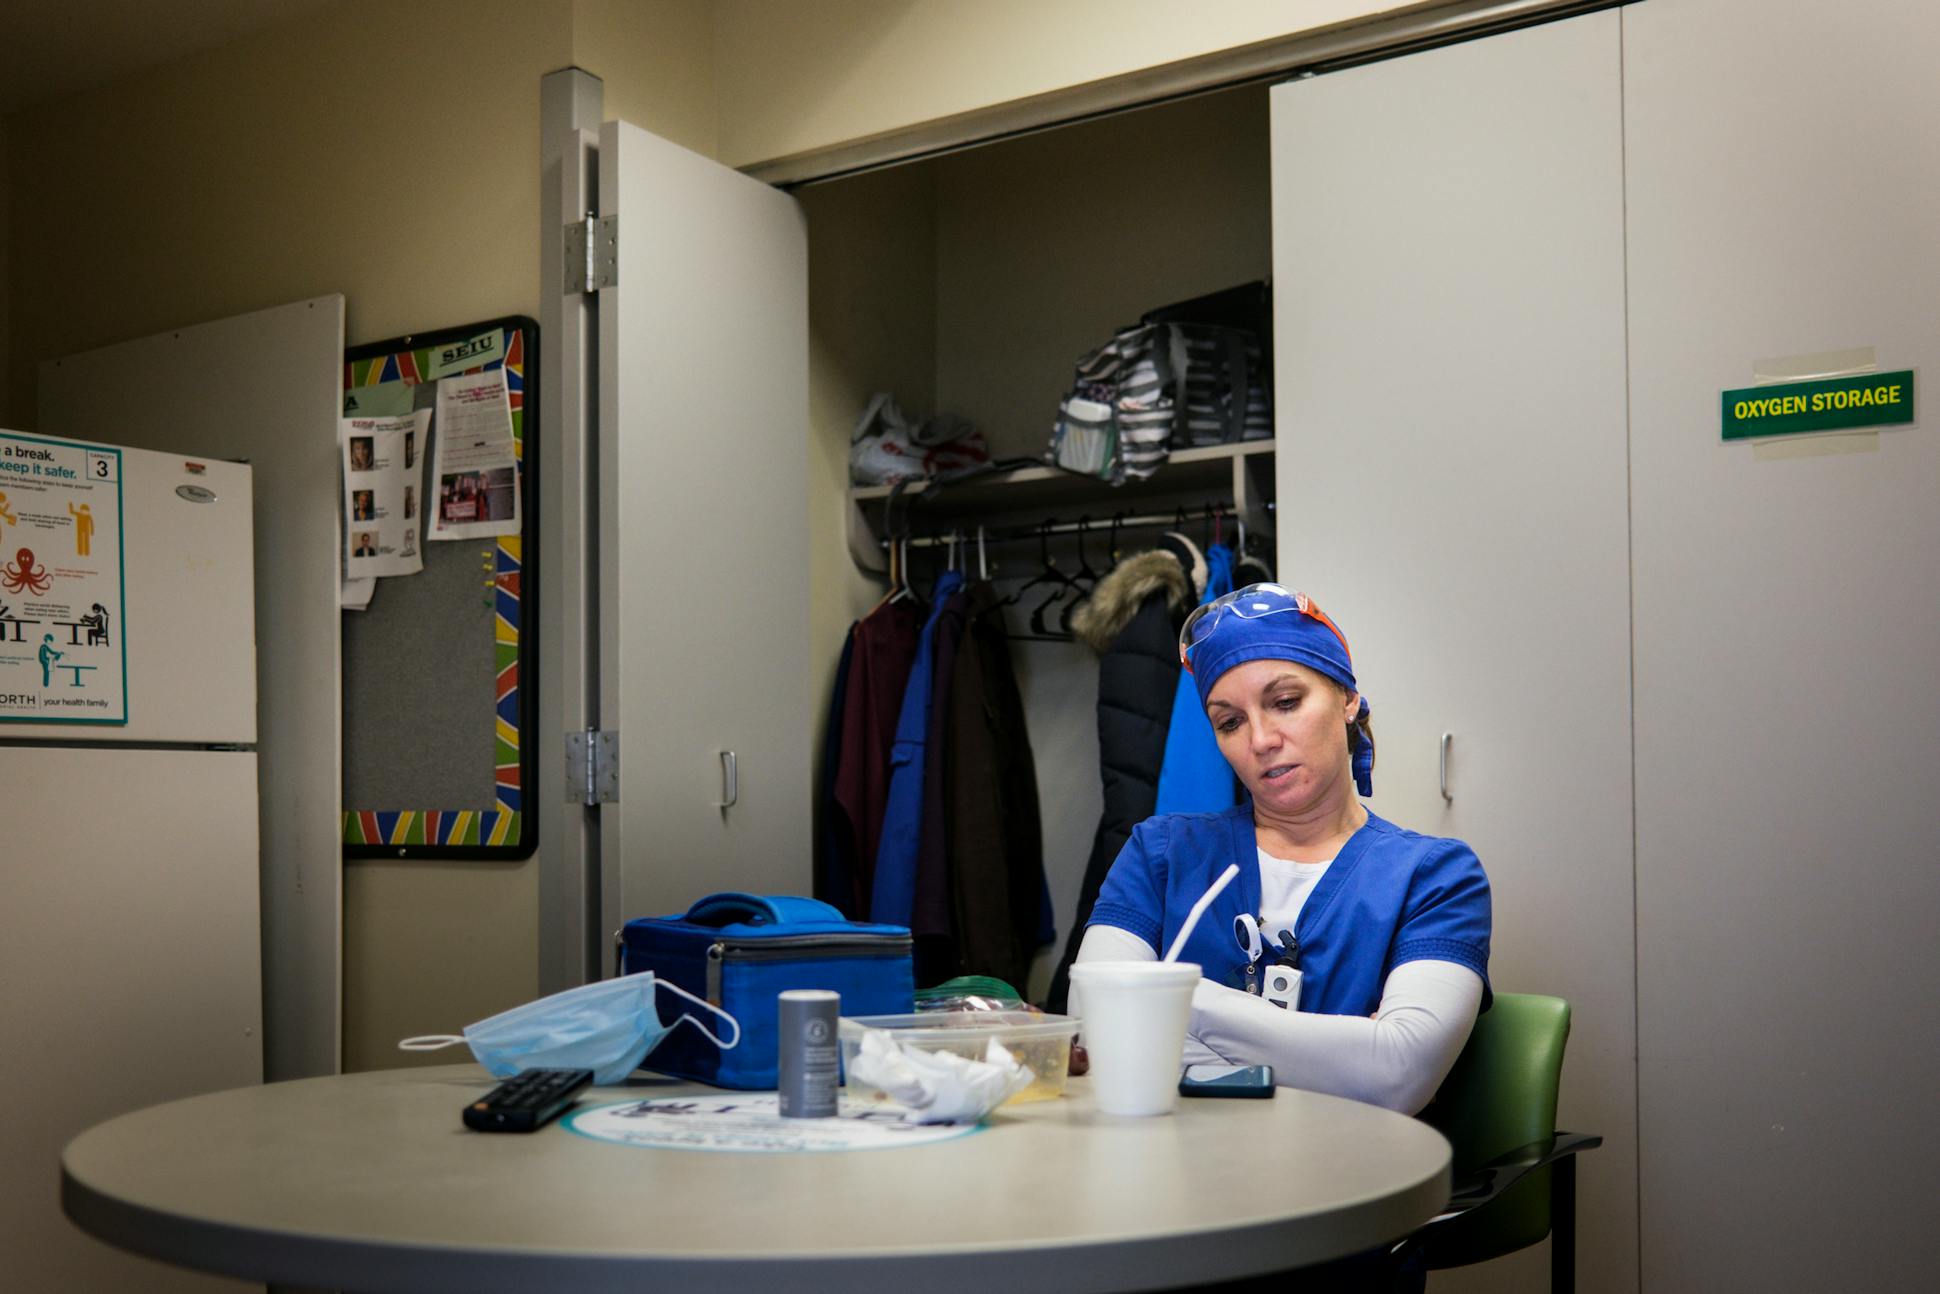 Holly Vilione took a few minutes for a quiet lunch break. Helping critically ill patients fight COVID, “You feel like you're at war,” she said.